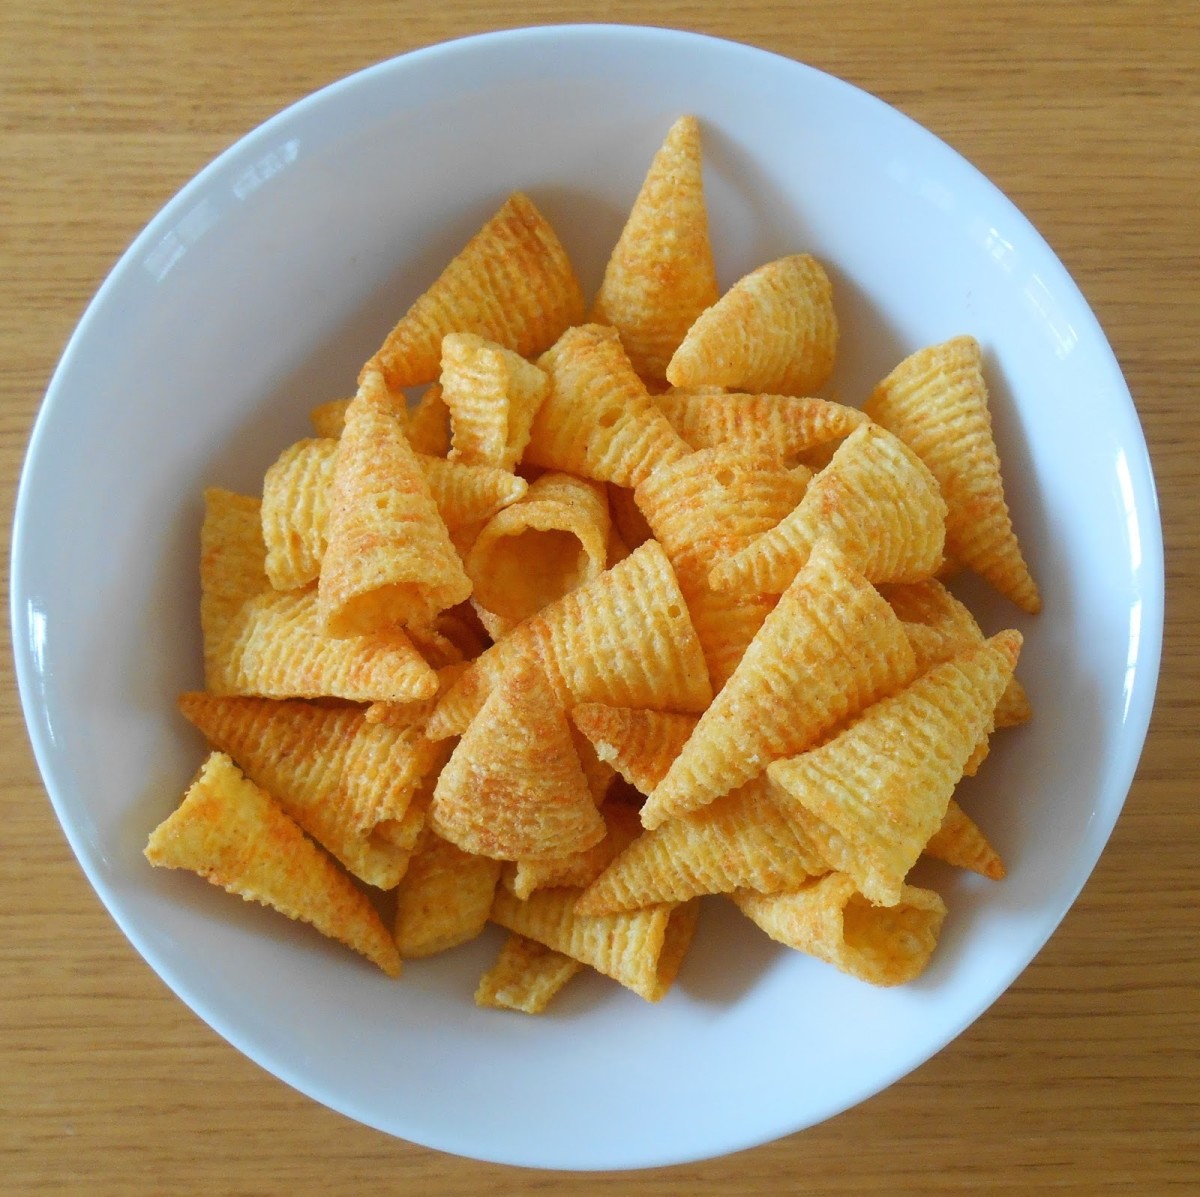 They're similar to Bugles. Not only are the textures similar, but so is the shape.